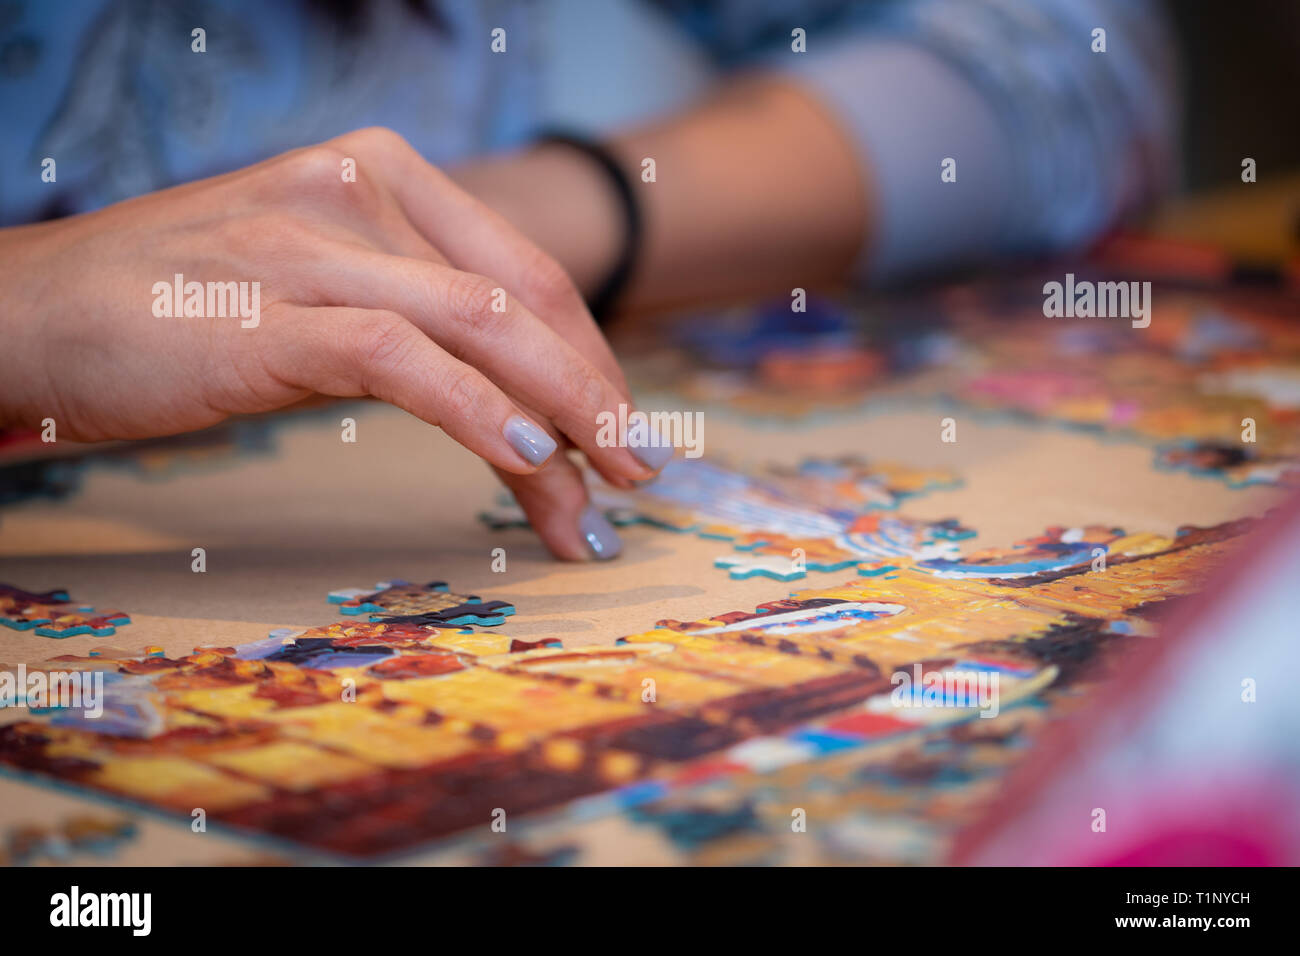 A woman and child's hands solving a jigsaw puzzle. Stock Photo